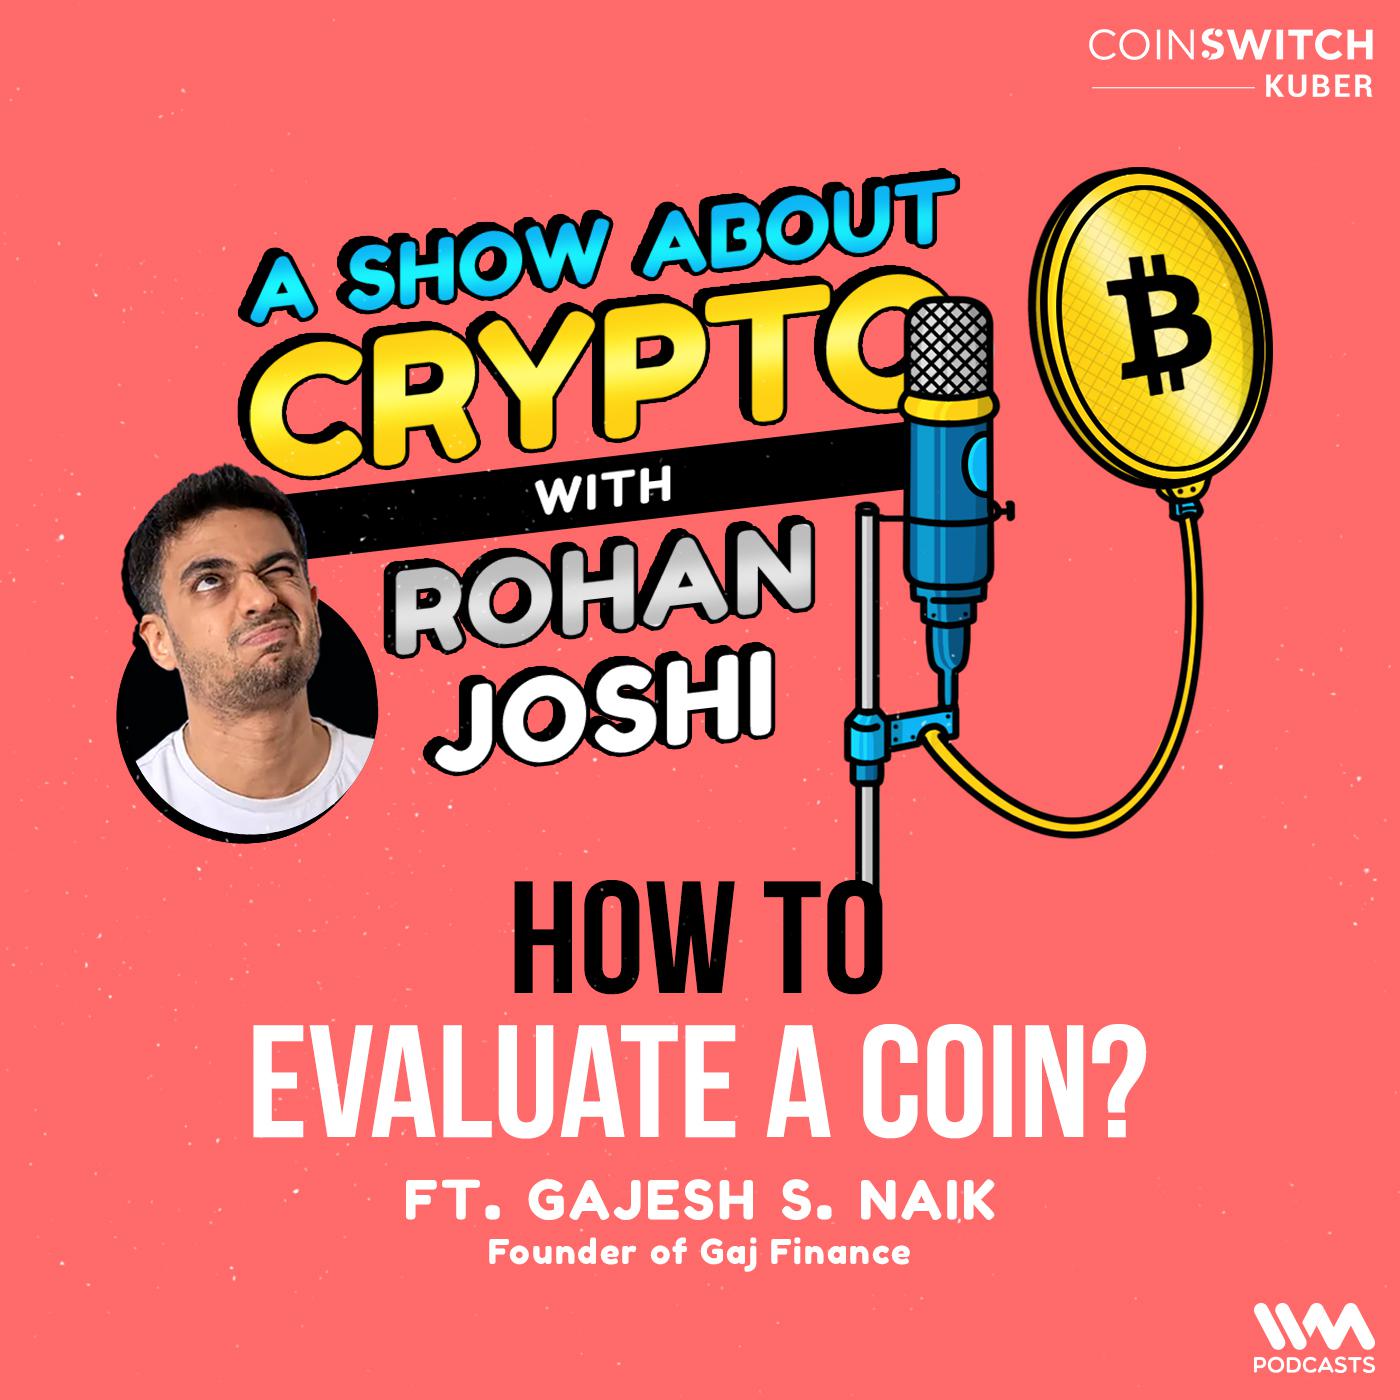 How to Evaluate a Coin? feat. Gajesh S. Naik